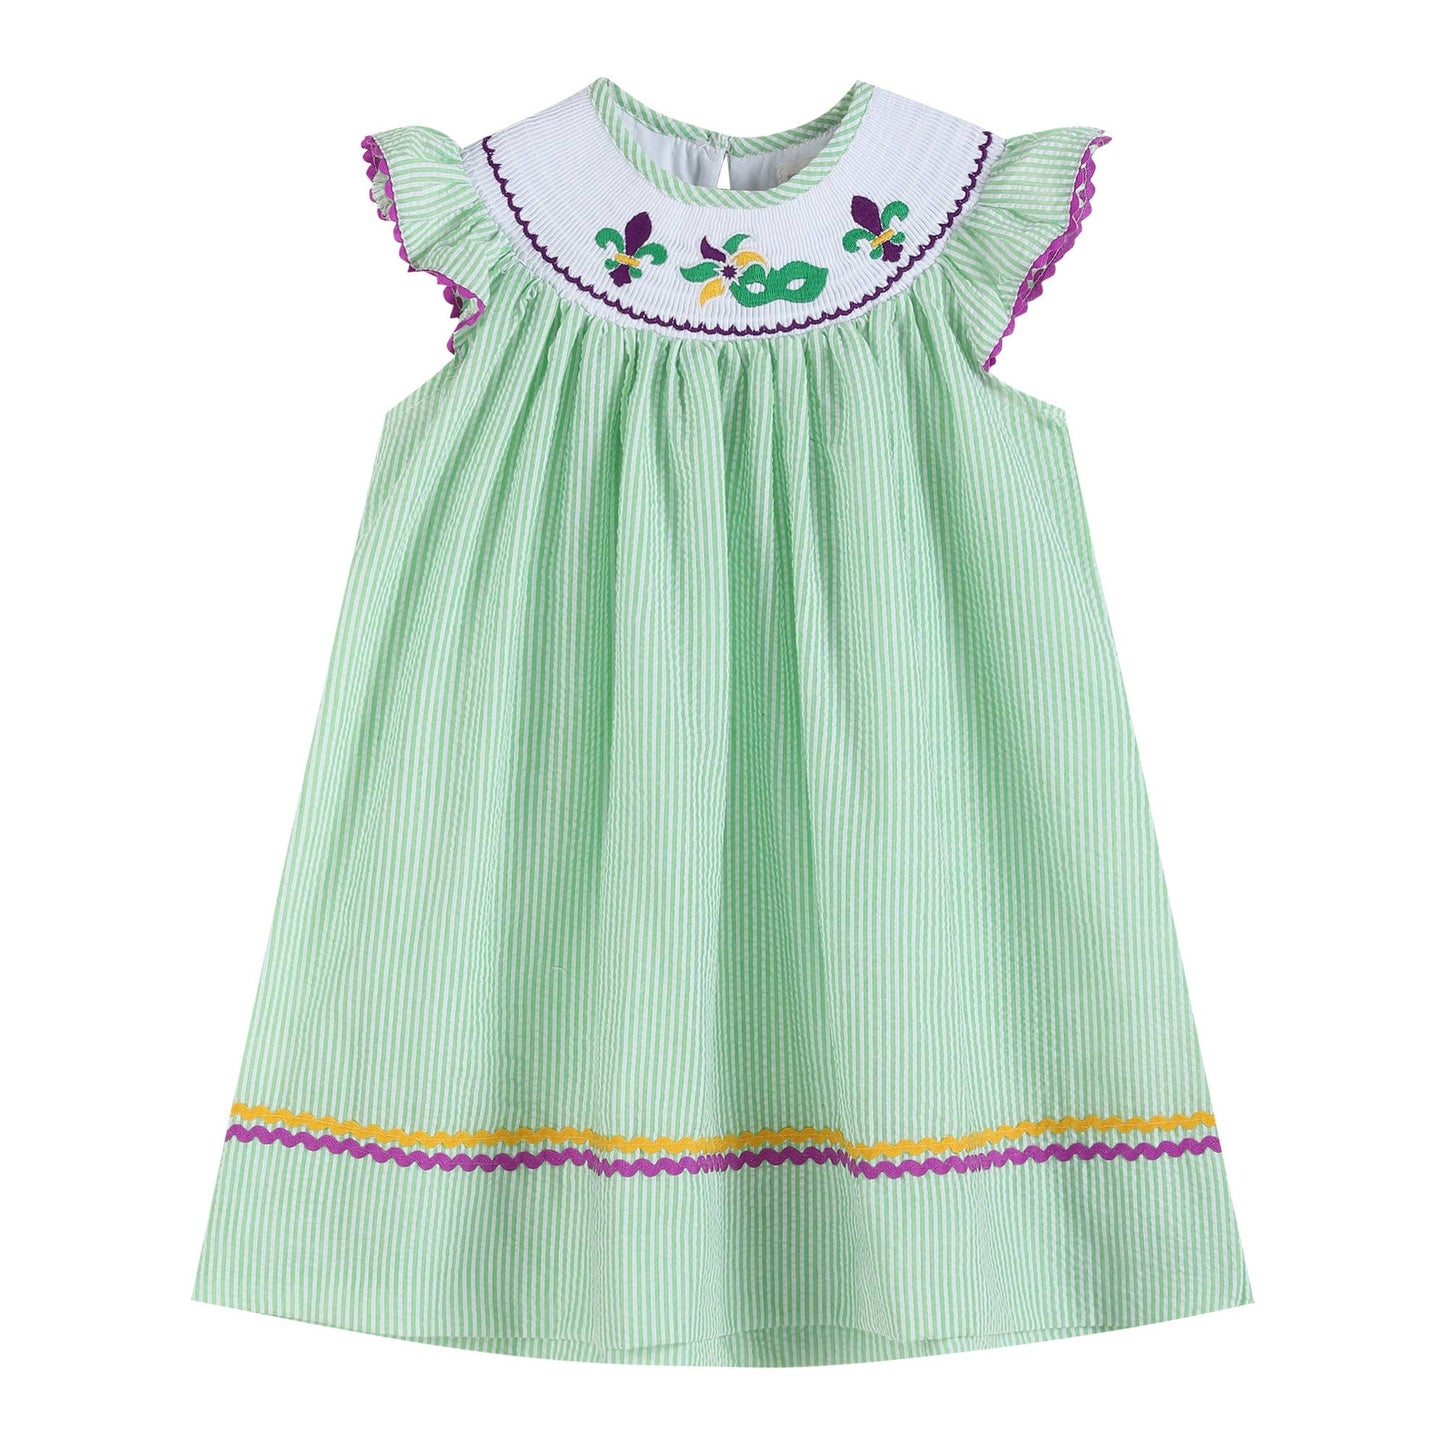 A Lil Cactus Green and Purple Mardi Gras Smocked Bishop Dress with a flower on it.